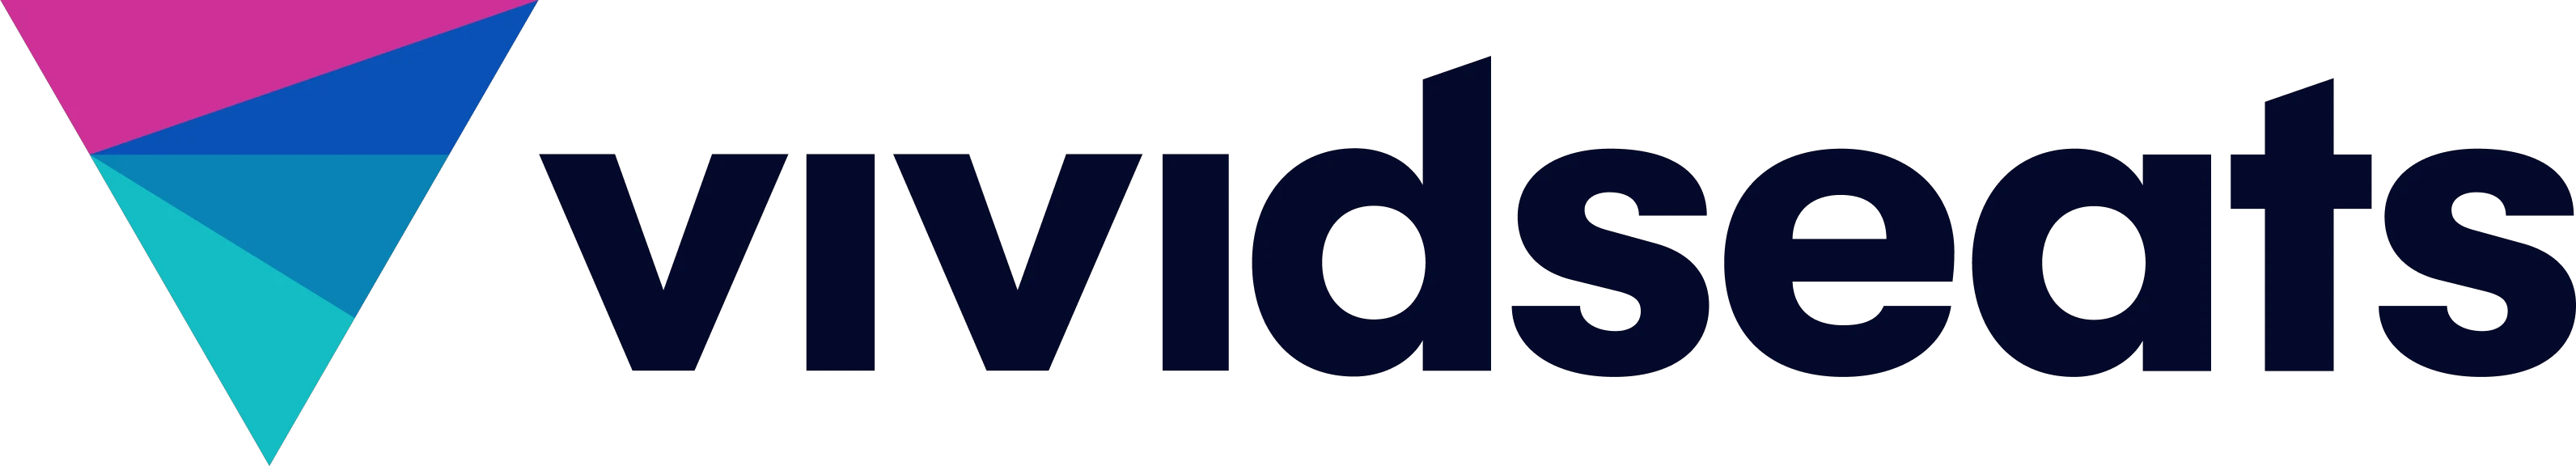 Score Fabulous Clearance By Using Vivid Seats Discount Coupons With Promo Codes - Check Them Out Now